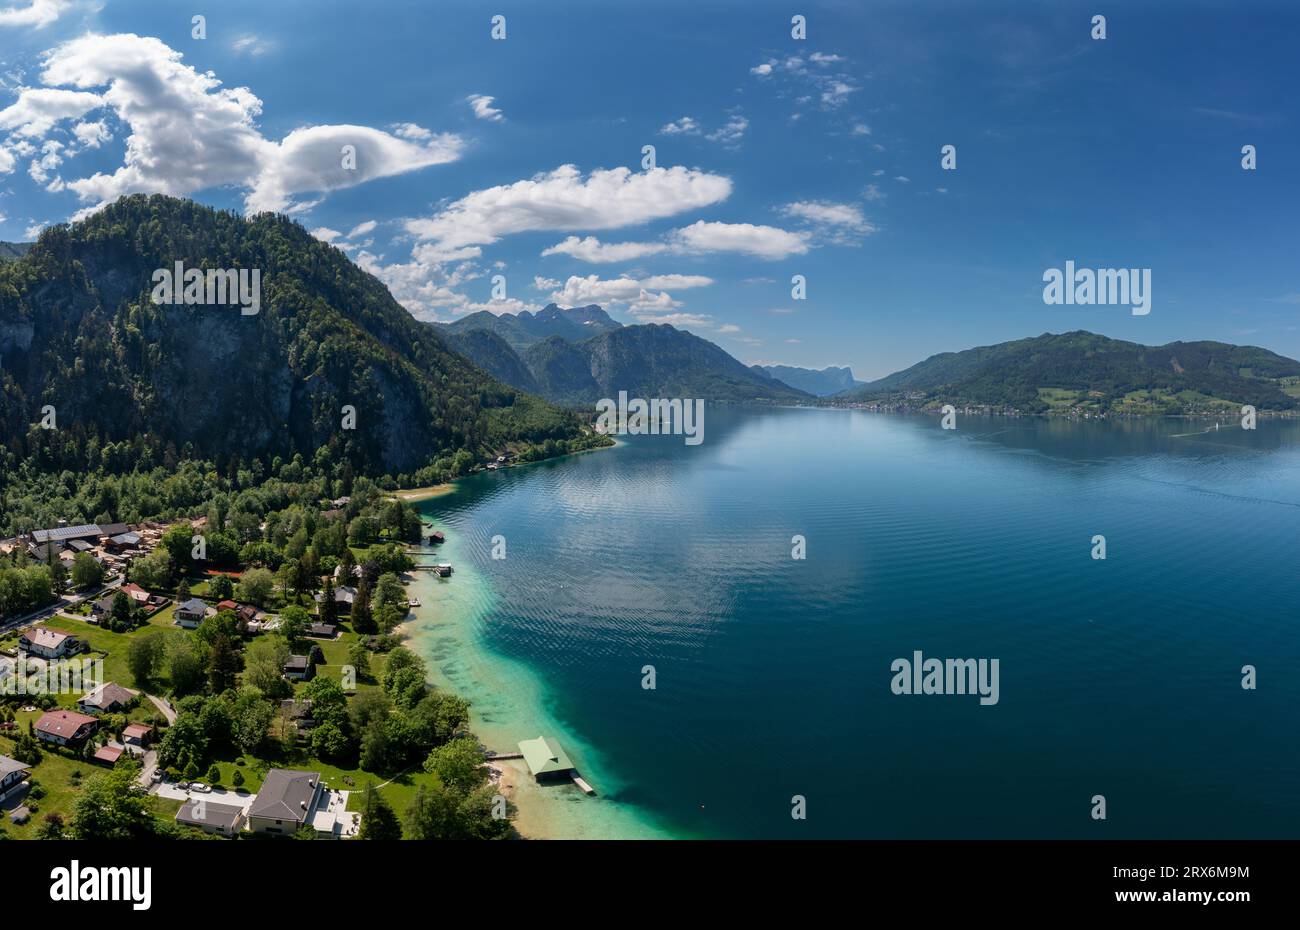 Austria, Upper Austria, Weissenbach am Attersee, Drone view of Lake Atter and surrounding village in summer Stock Photo